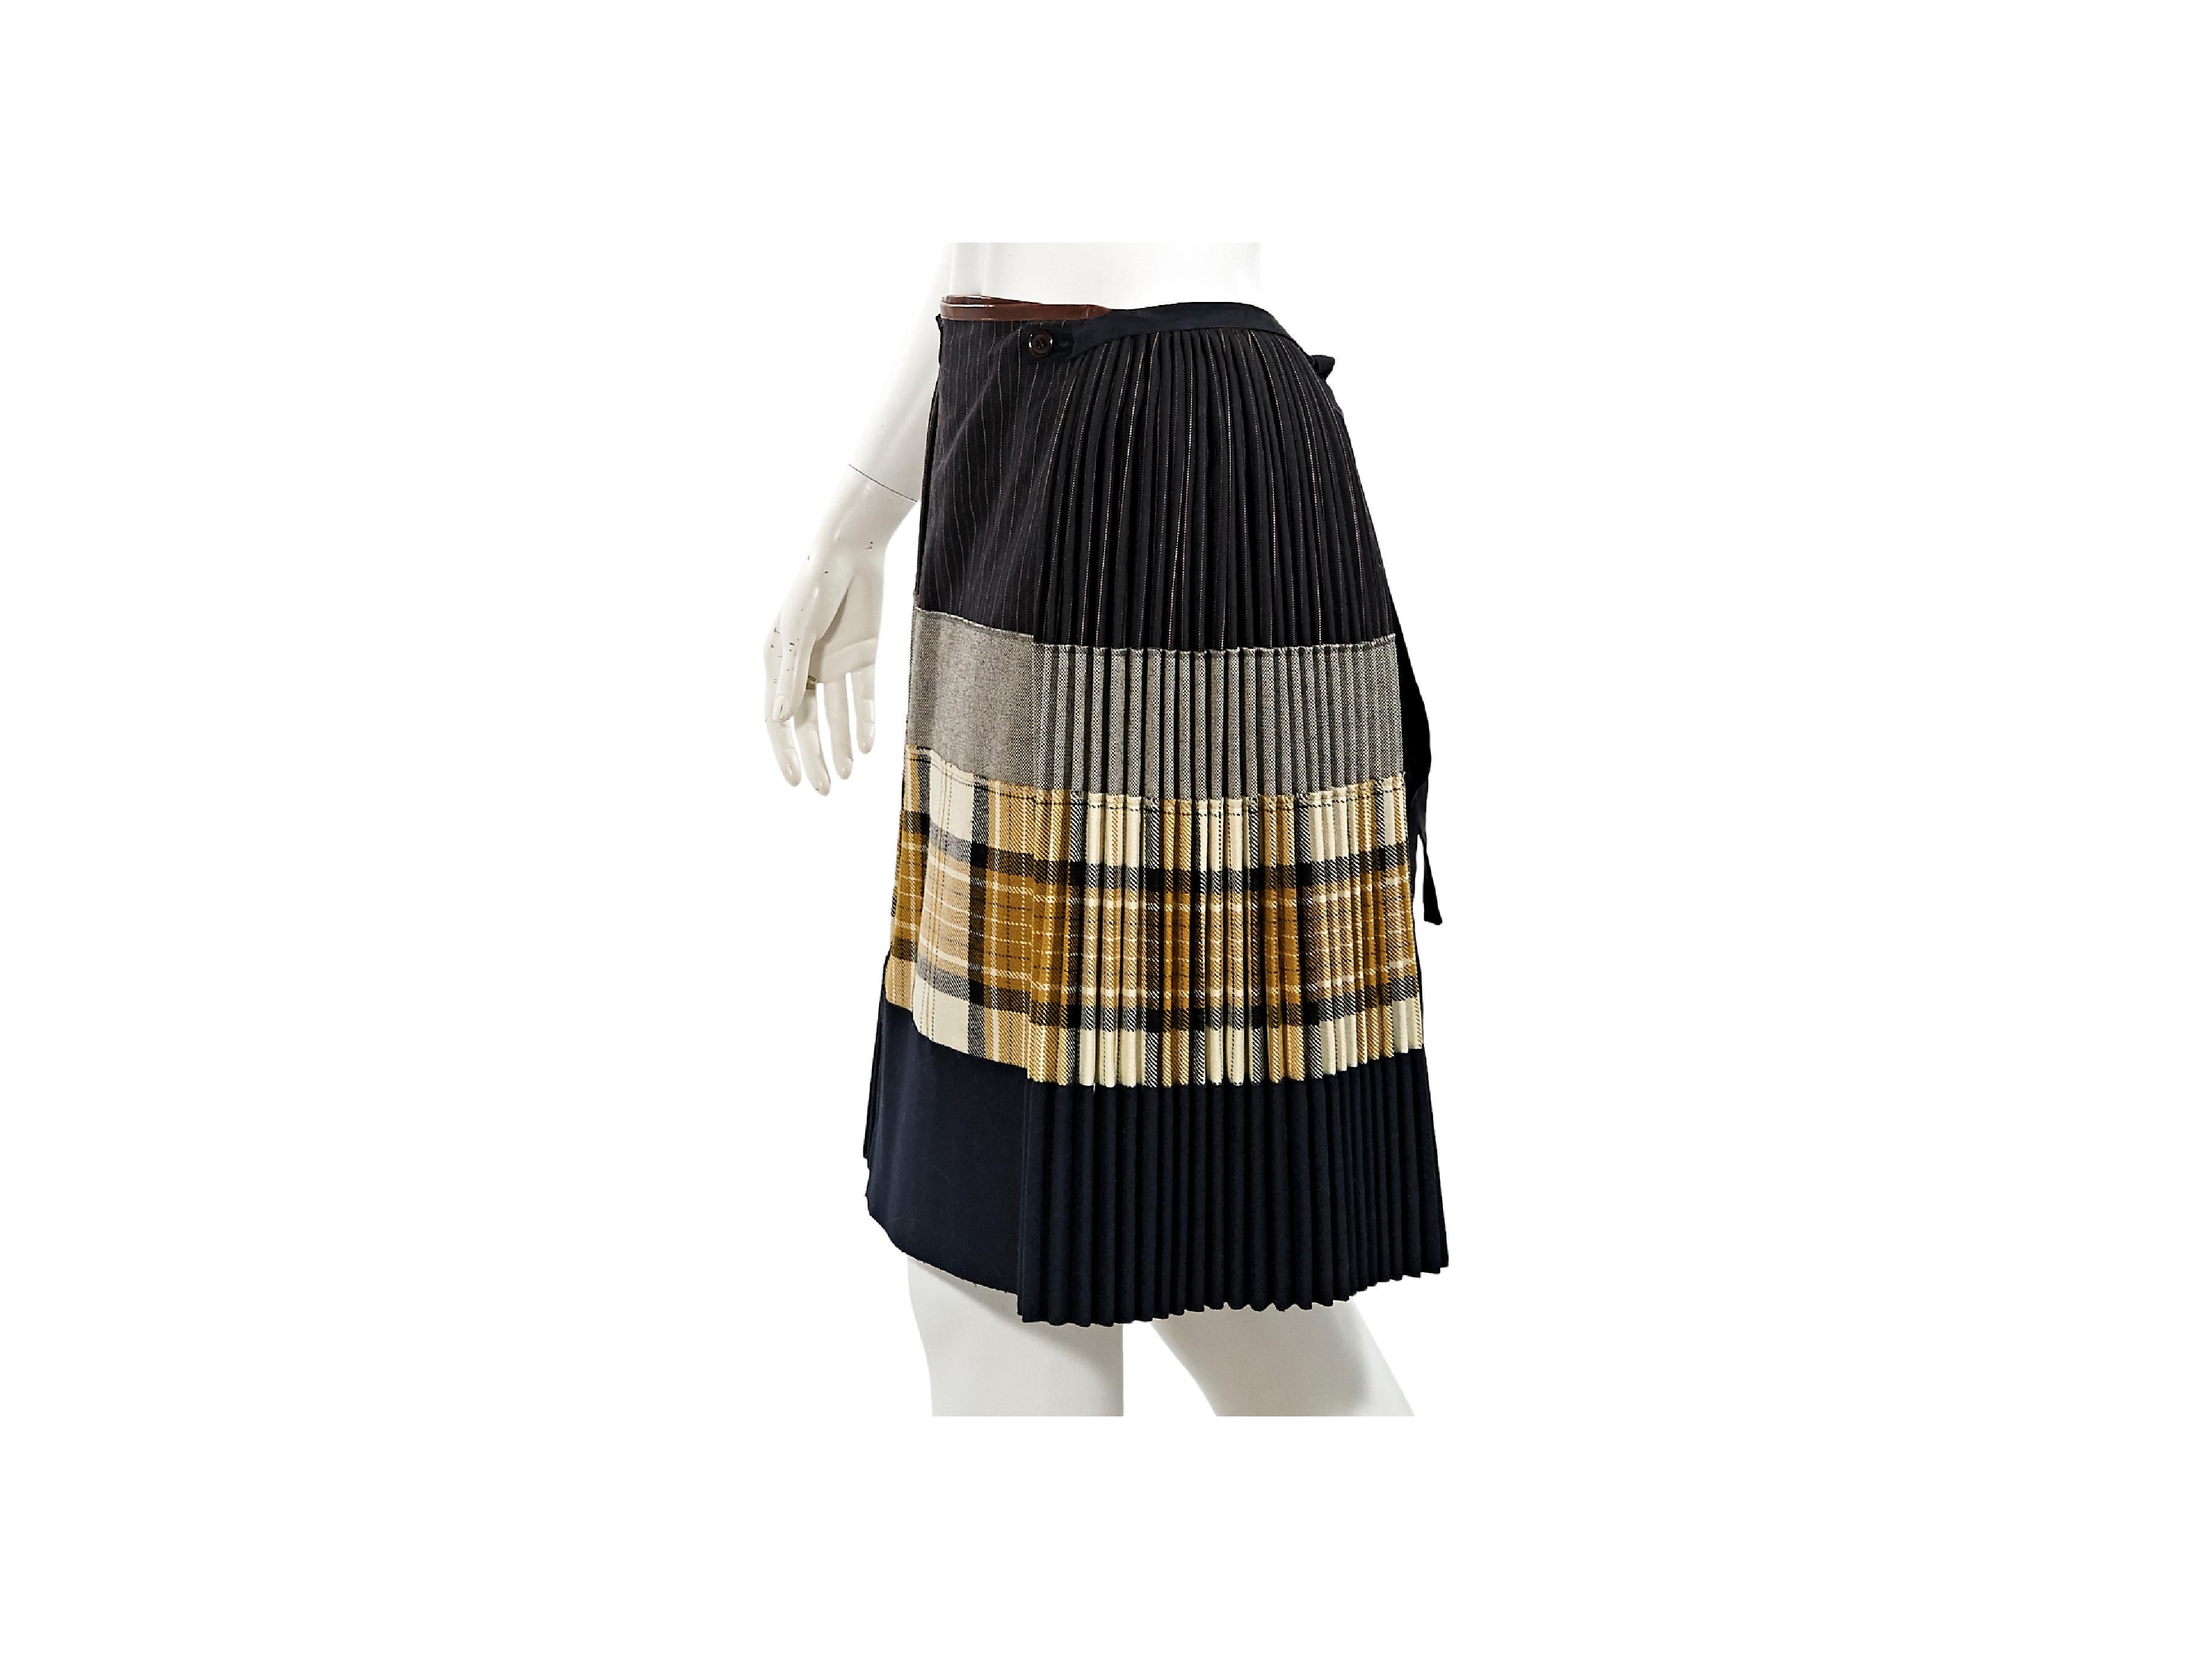 Product details:  Multicolor patchwork-style pleated wool skirt by Jean Paul Gaultier.  Button front with tie-back closure.  26